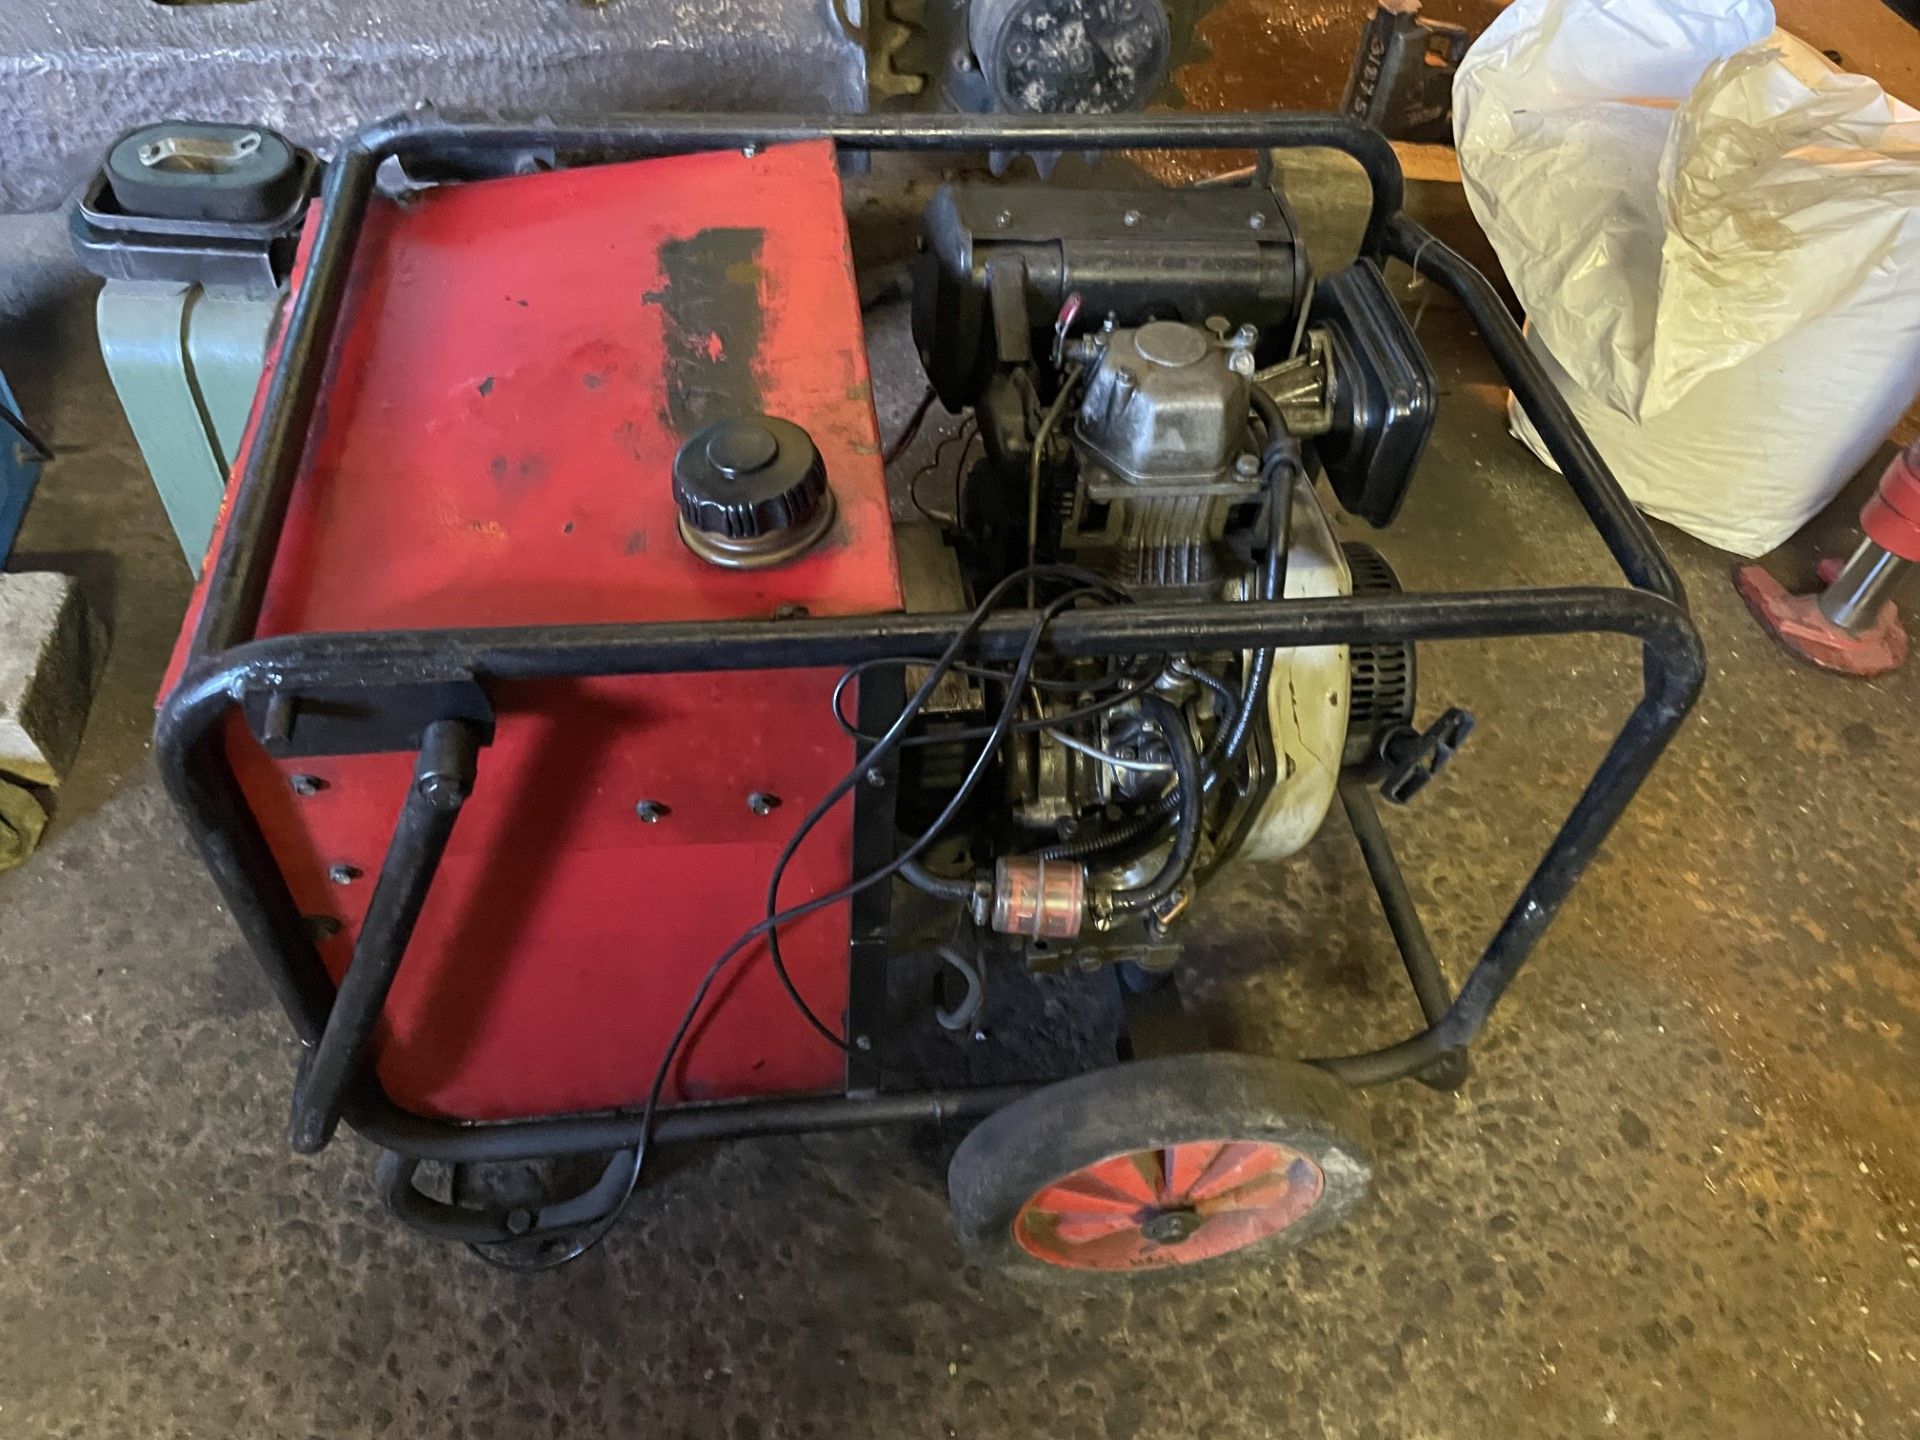 Generator with yanmar engine The engine sounds rough when you turn it over So could be a new - Image 2 of 7